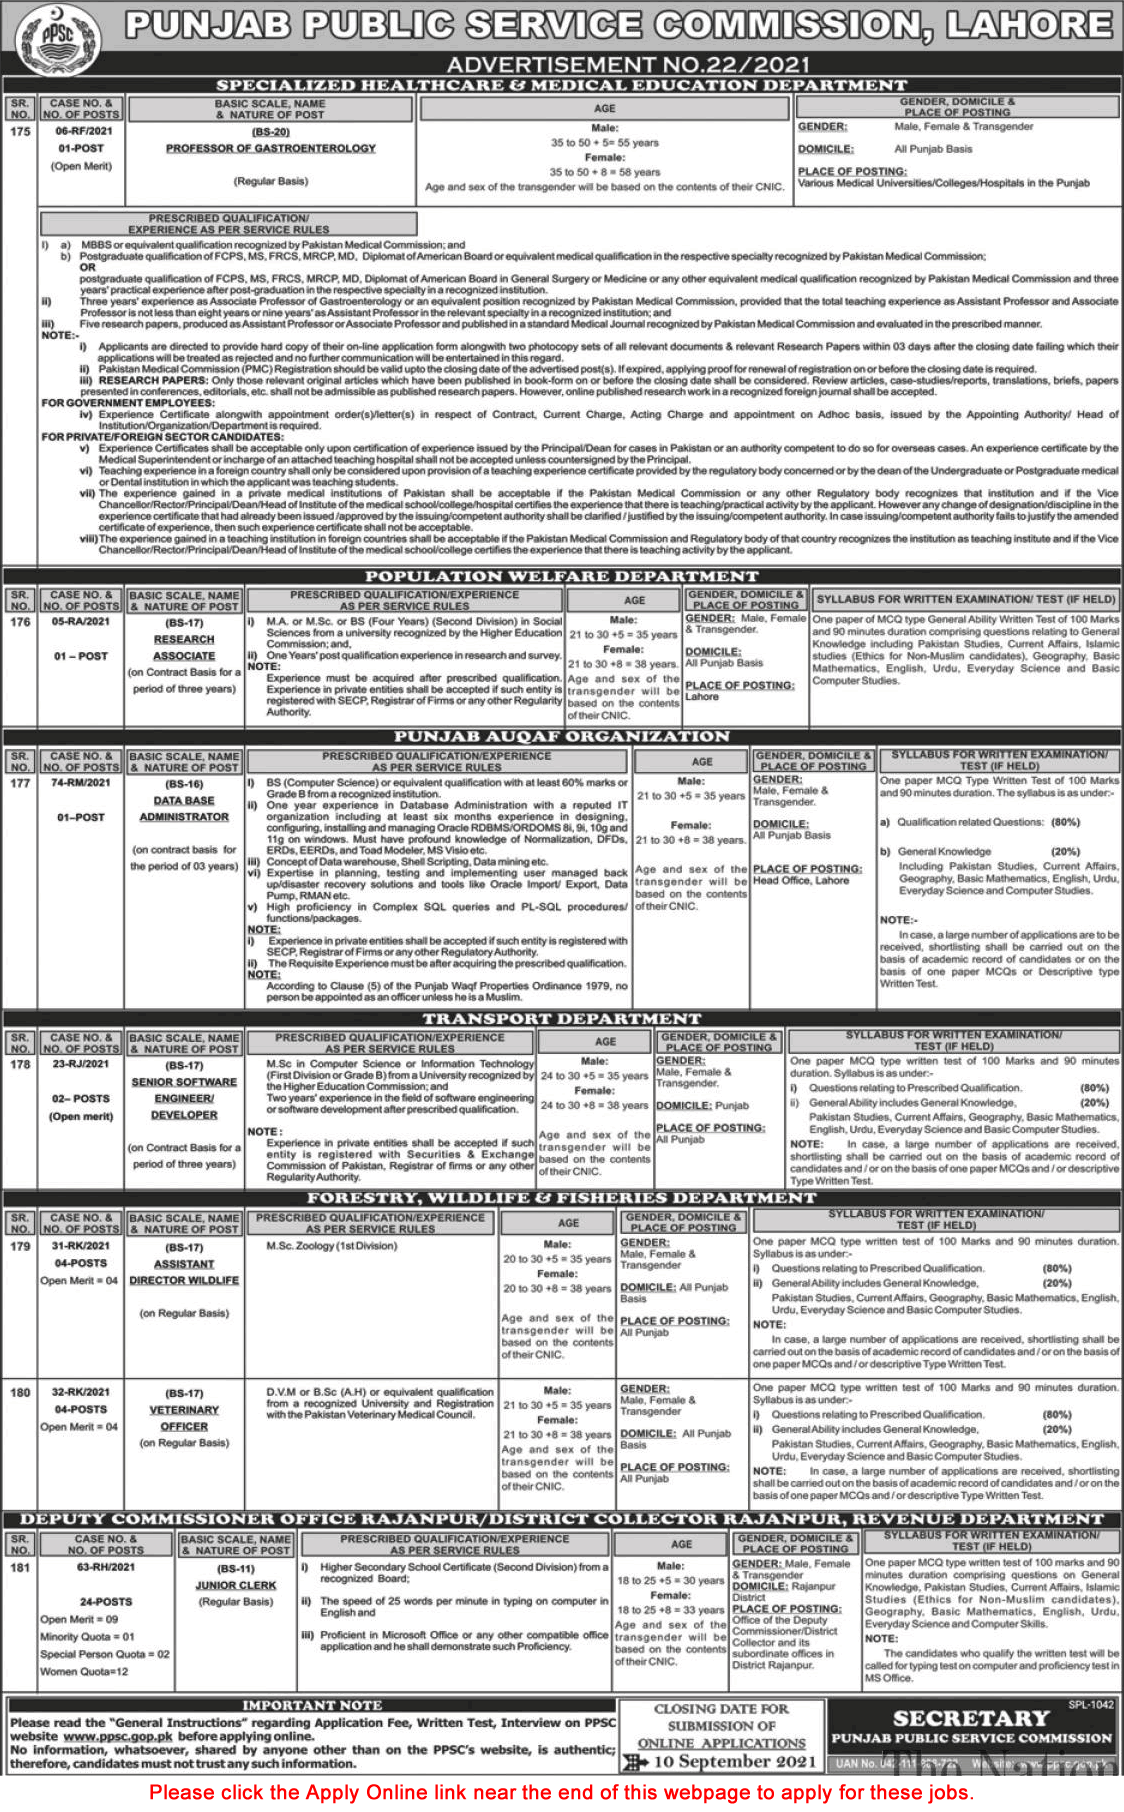 PPSC Jobs 2021 August Apply Online Consolidated Advertisement No 22/2021 Latest